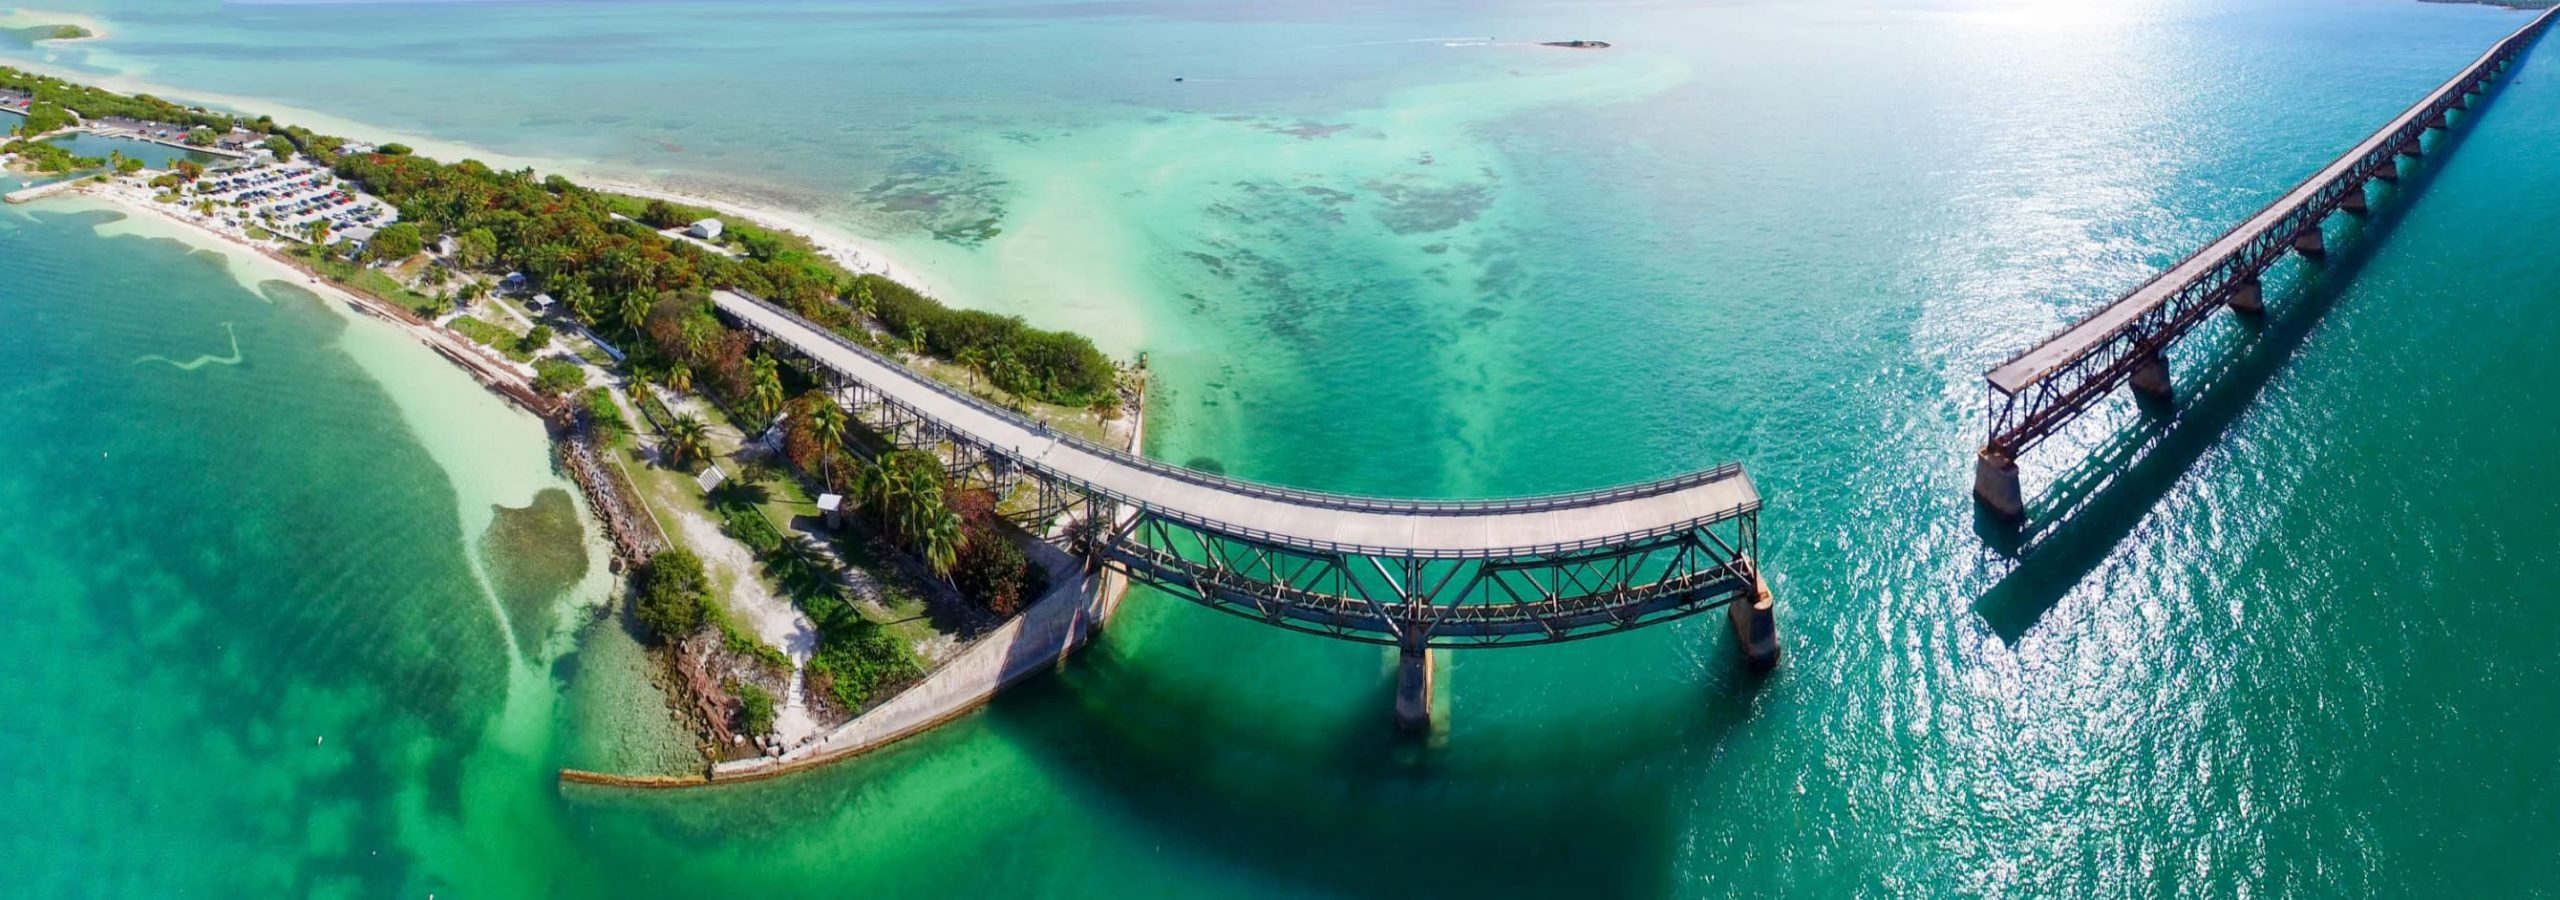 Key West, in Florida, seen from above.